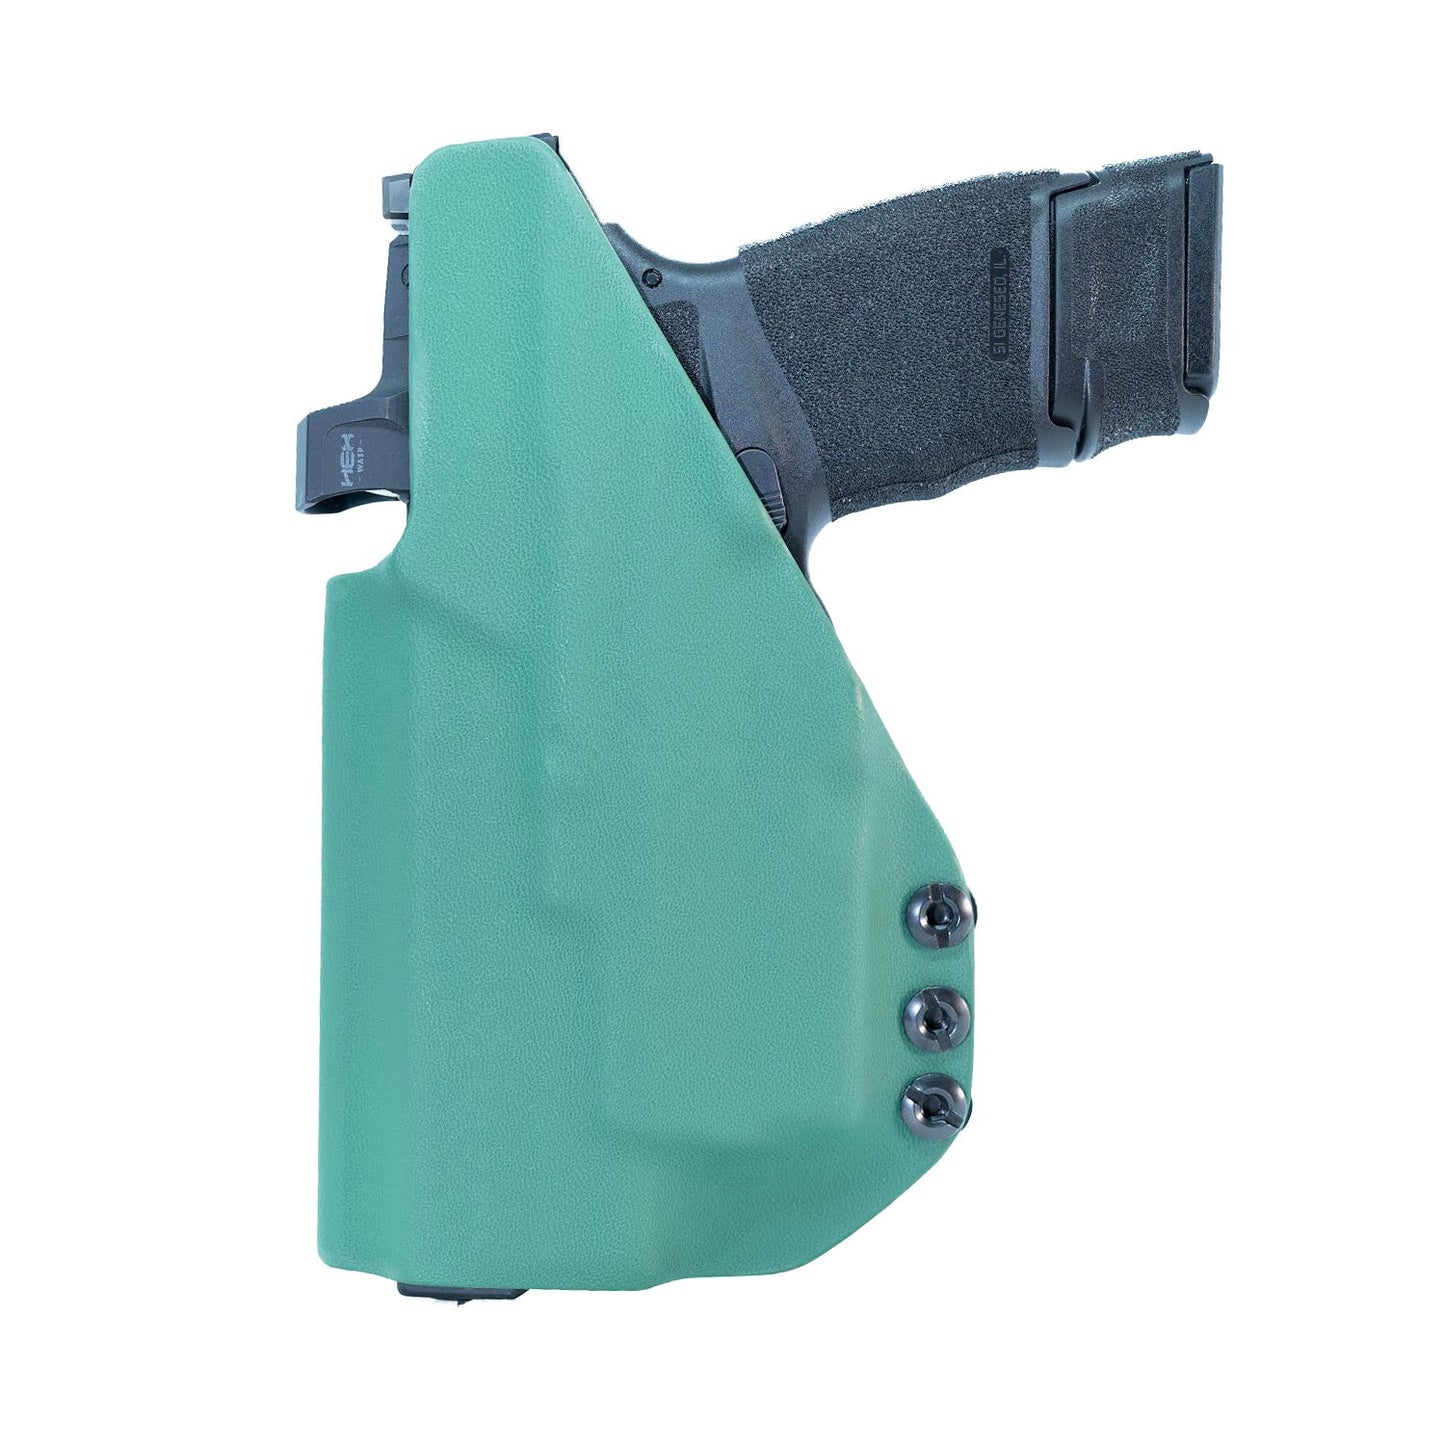 SIG P365/ P365X With TLR6 Light  IWB ( Inside The Waistband Holster)